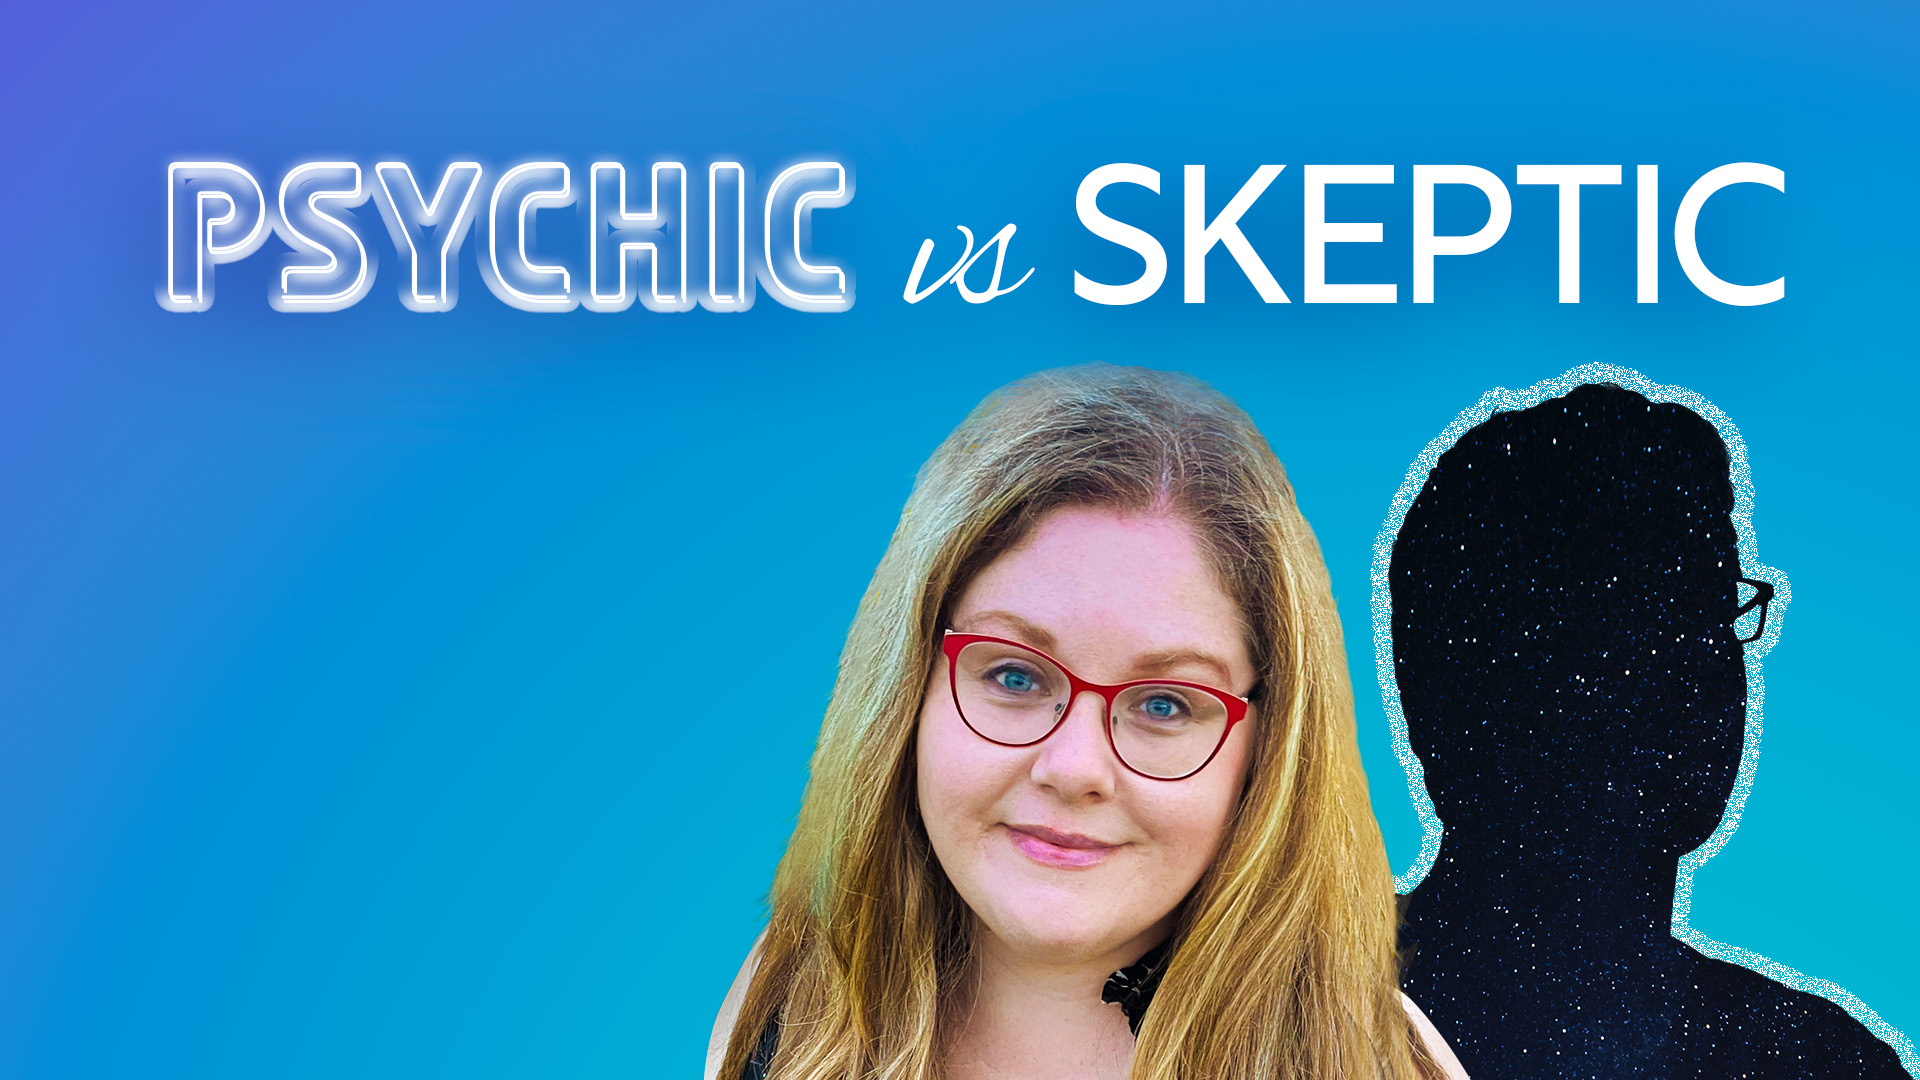 Click Here for the Psychic vs Skeptic Podcast